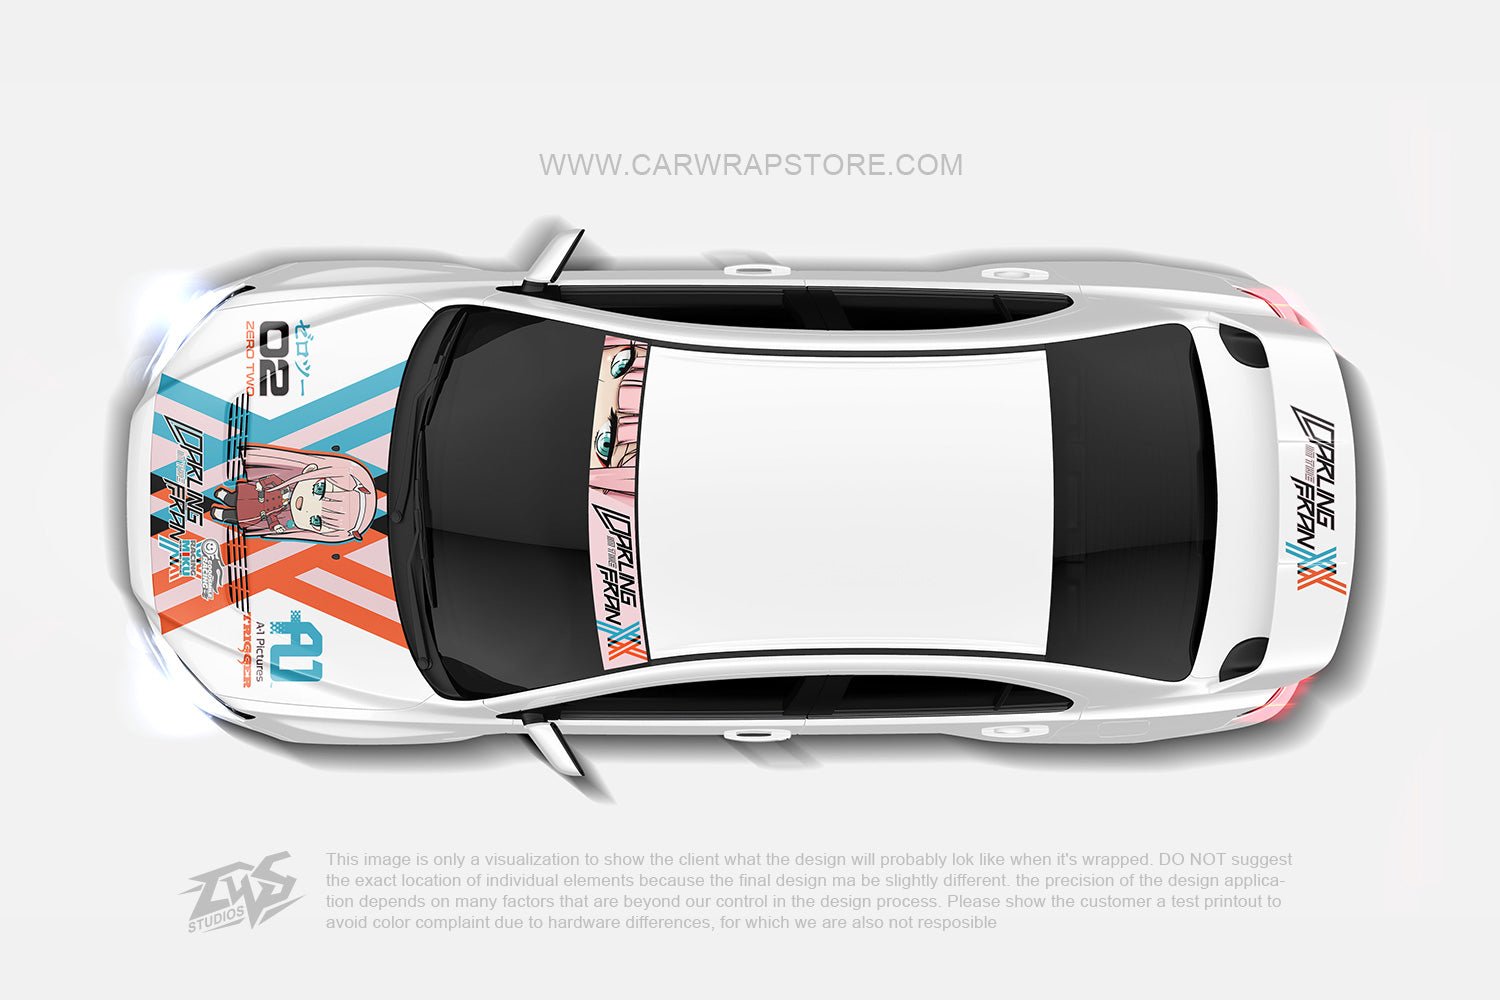 Zero Two DARLING in the FRANXX【002-16】 - Car Wrap Store